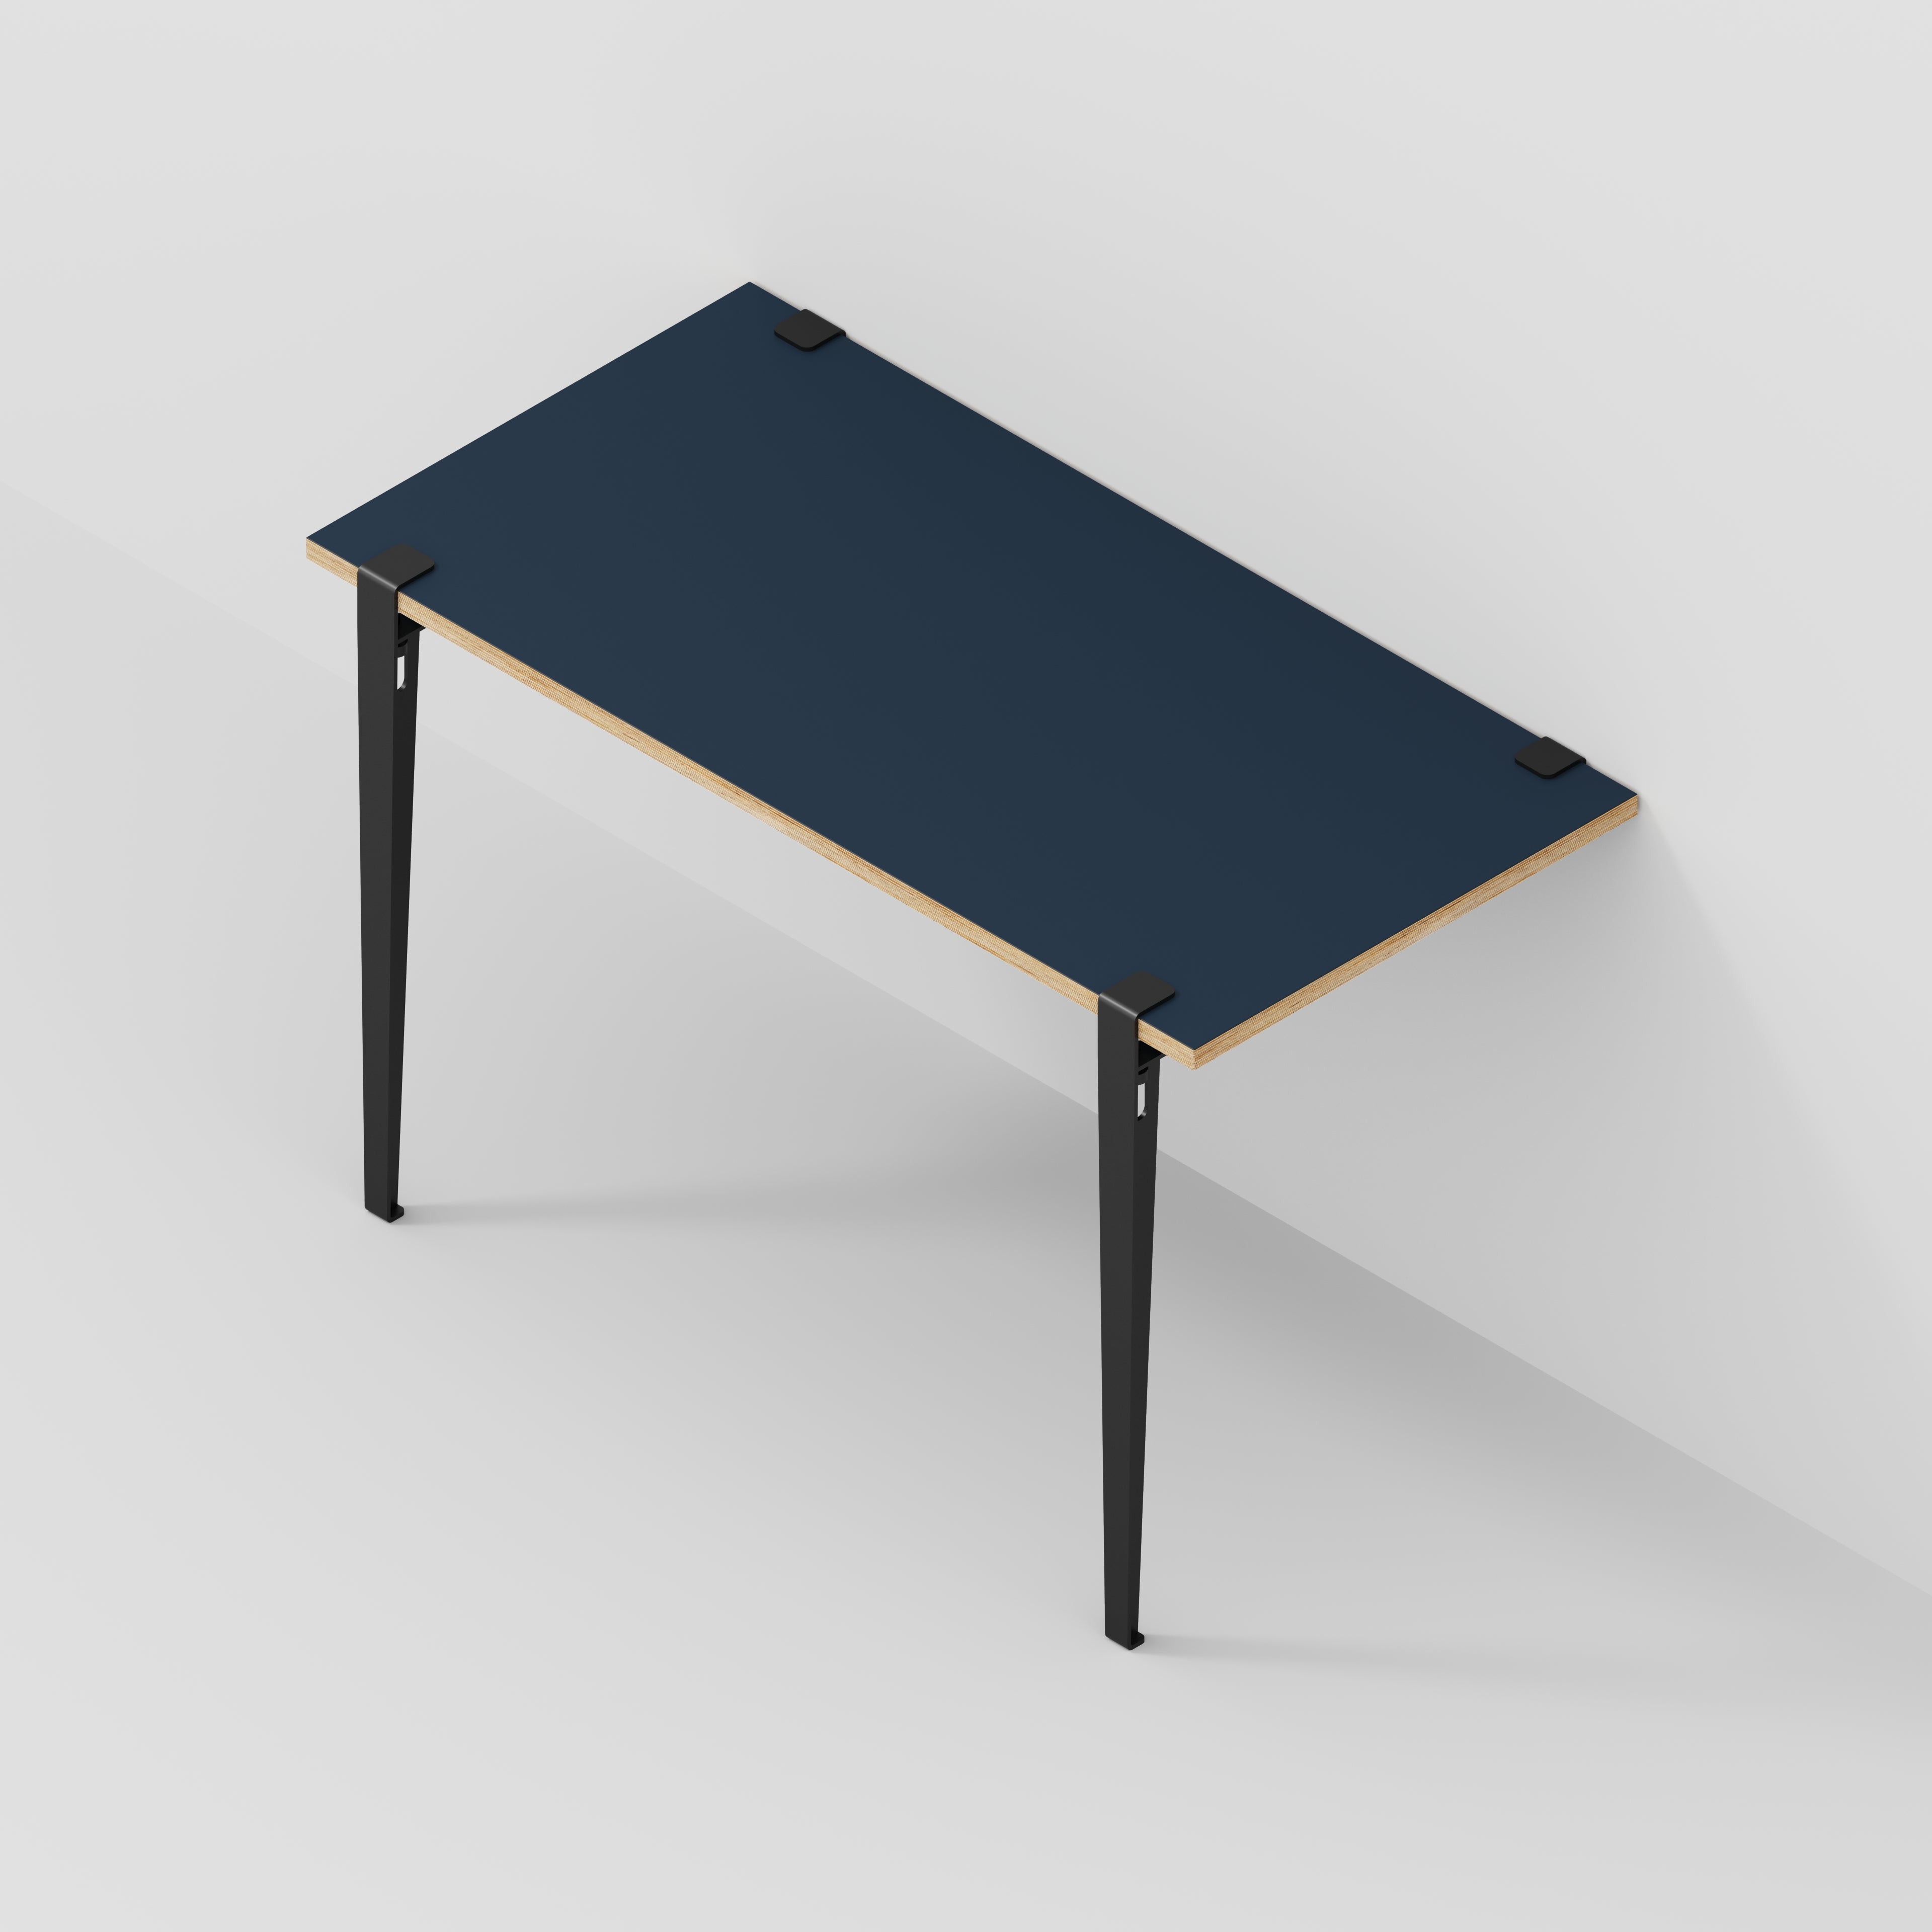 Wall Desk with Black Tiptoe Legs and Brackets - Formica Night Sea Blue - 1200(w) x 600(d) x 750(h)